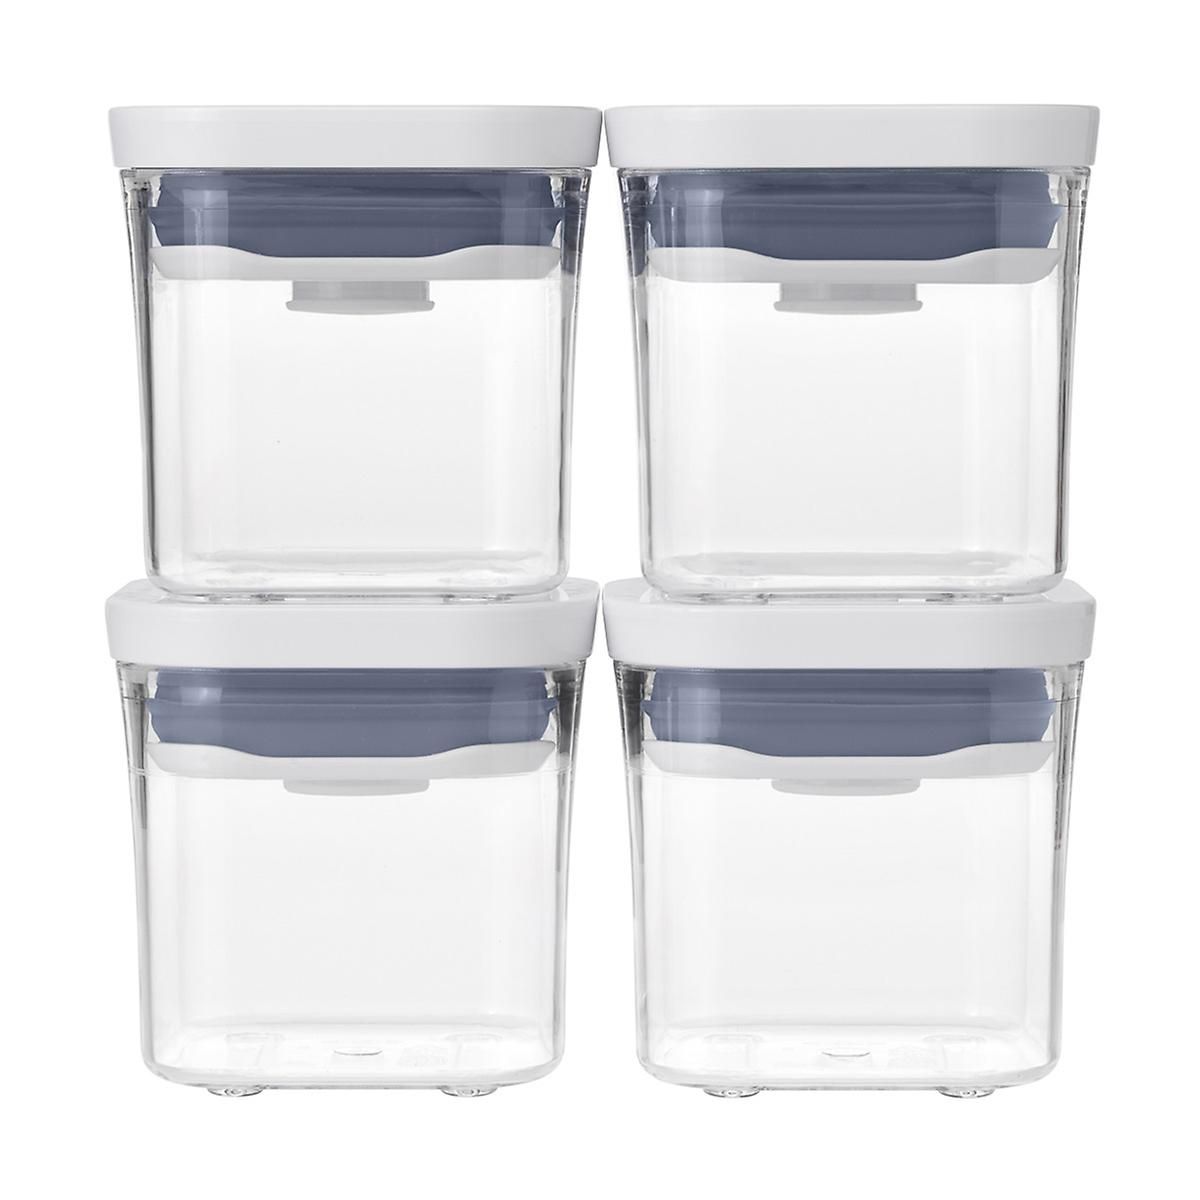 OXO Good Grips 4-Piece Mini POP Canisters | The Container Store